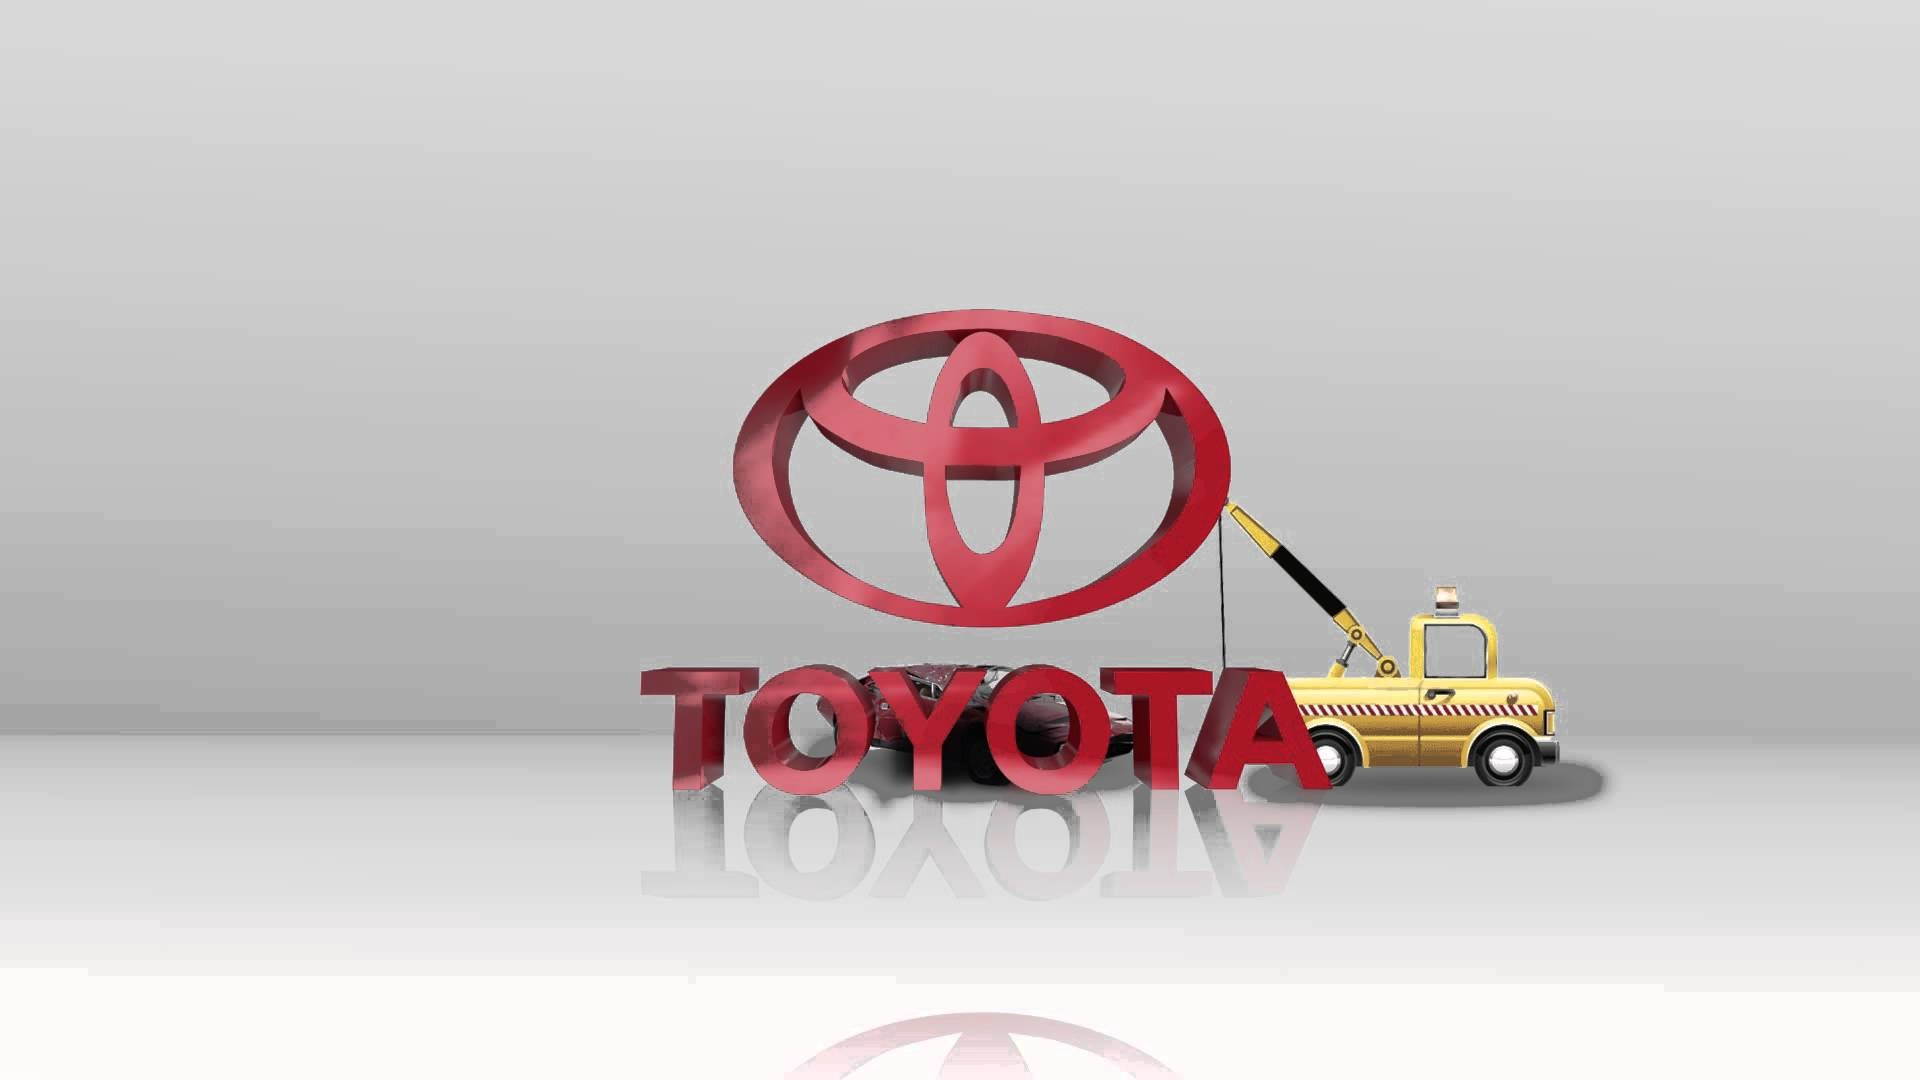 1920x1080 Toyota Logo Wallpaper posted by Samantha Simps